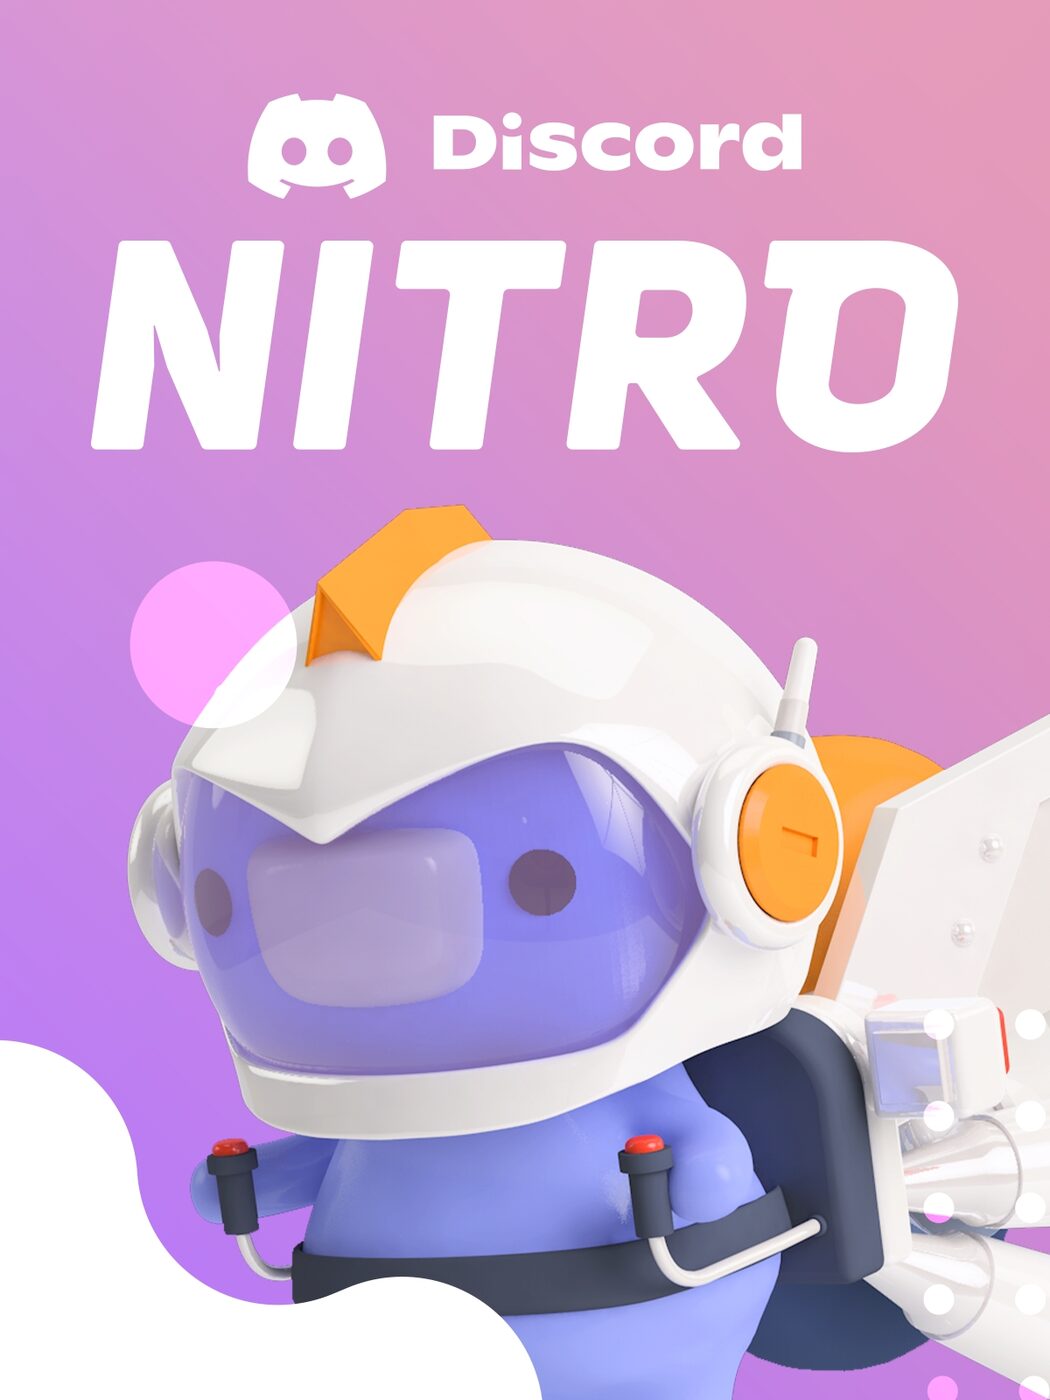  Discord Nitro 1-Month Subscription Gift Card [Digital Code] :  Everything Else